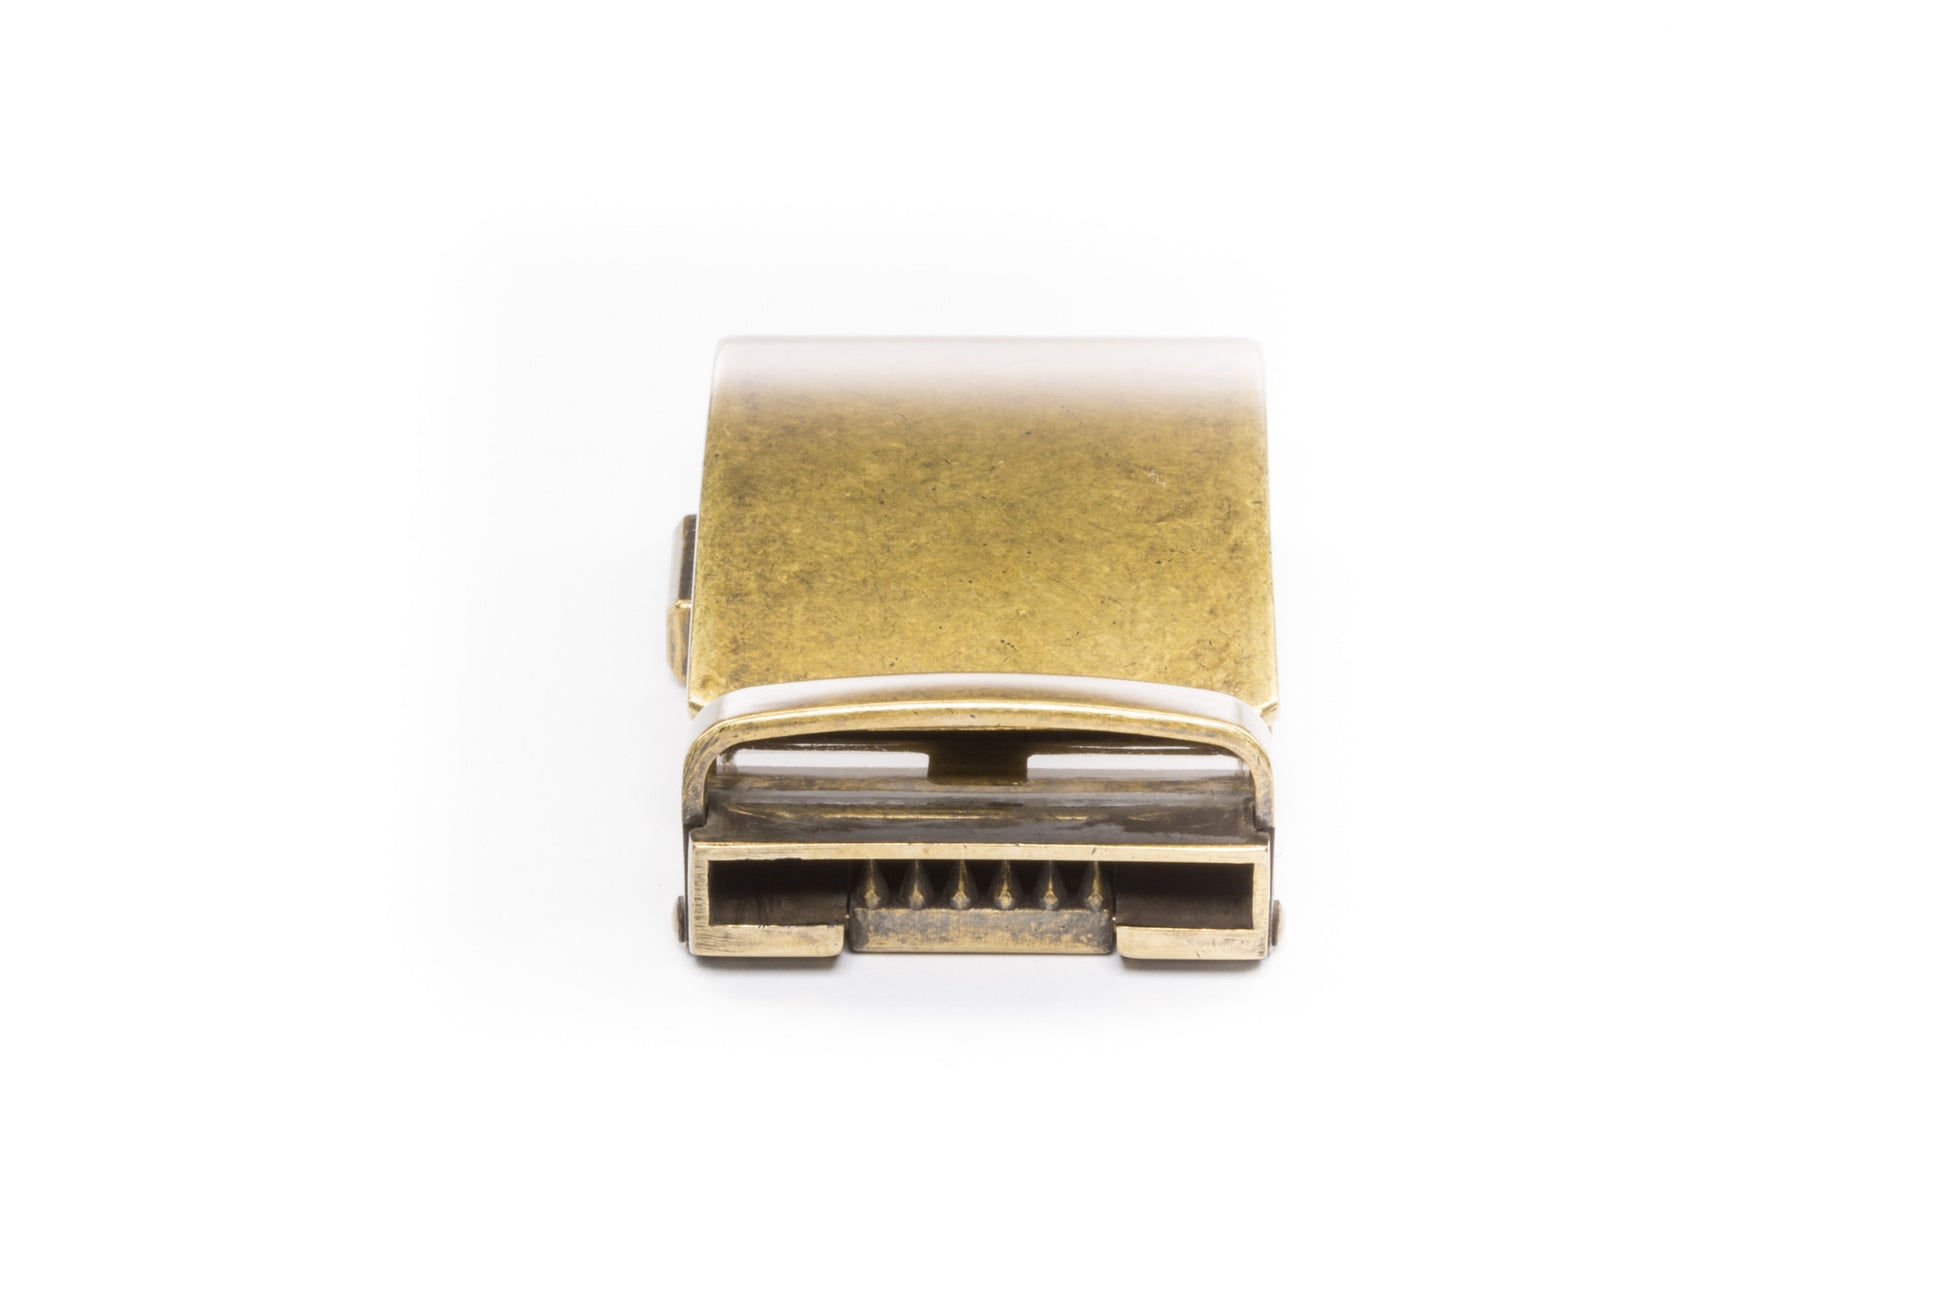 Men's classic ratchet belt buckle in antiqued gold with a width of 1.5 inches, rear view.